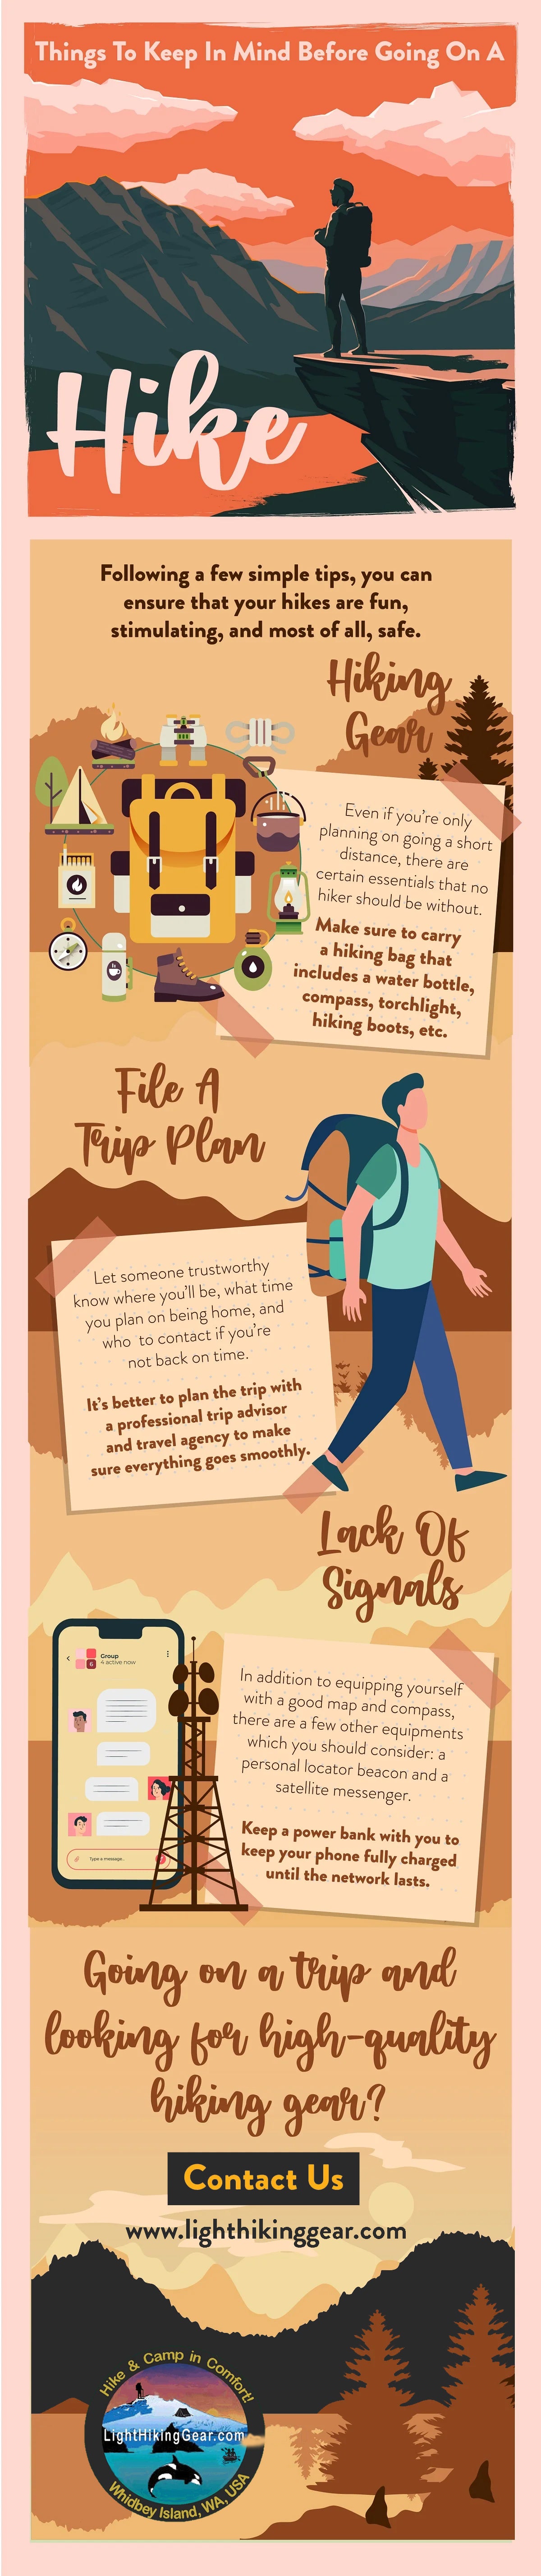 Things To Keep In Mind Before Going On A Hike | Infographics